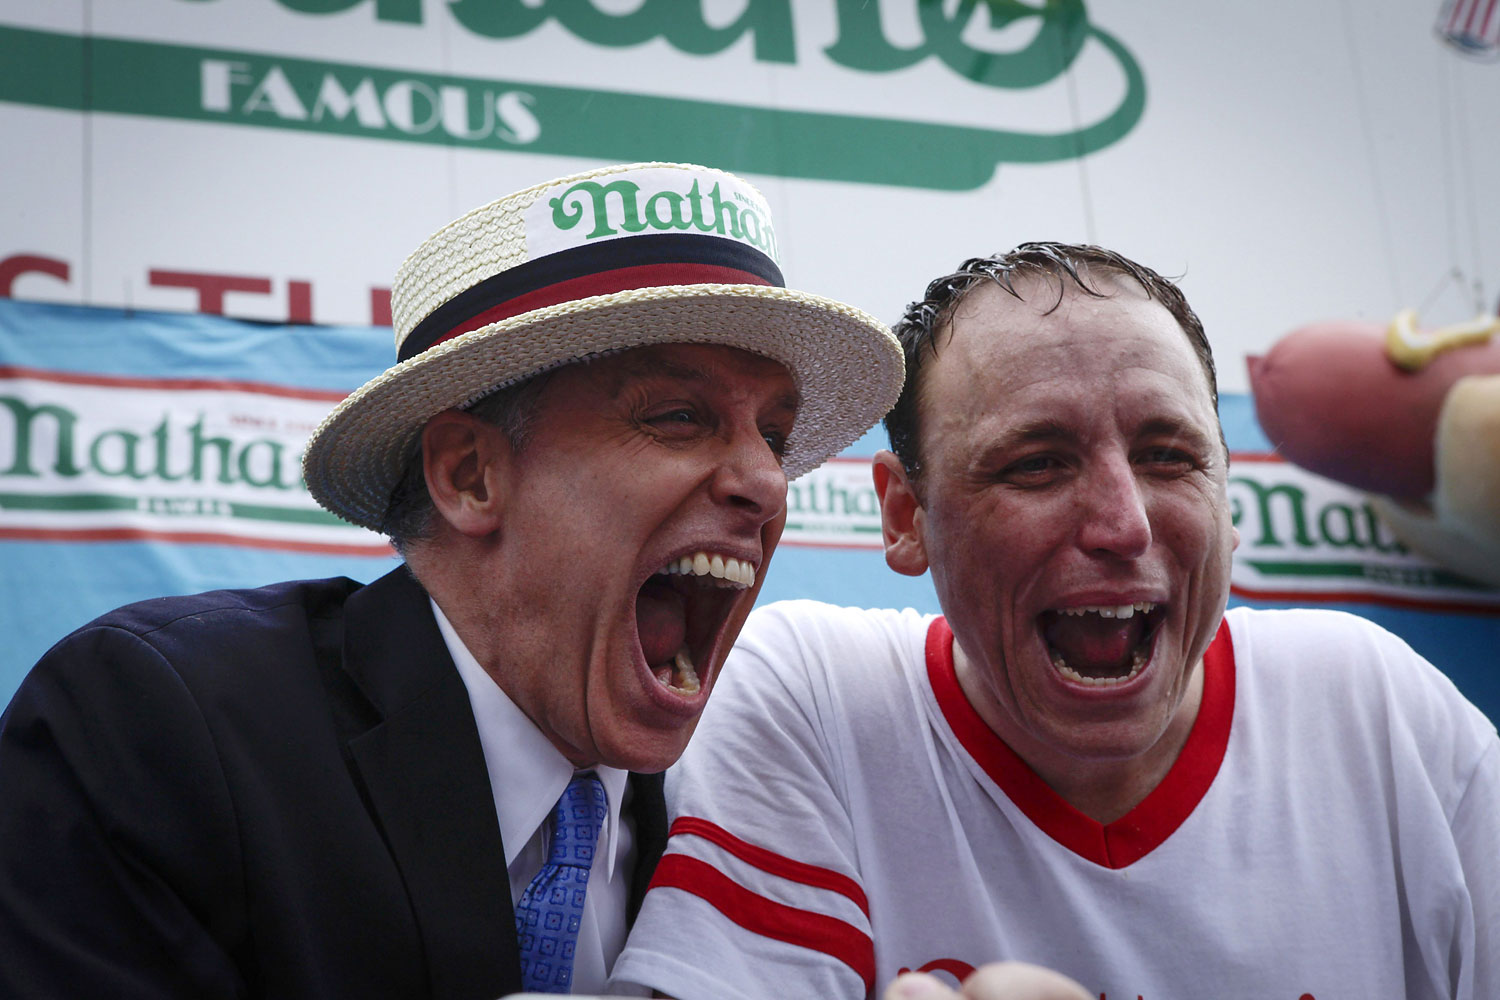 Annual Hot Dog Eating Contest Held On New York's Coney Island